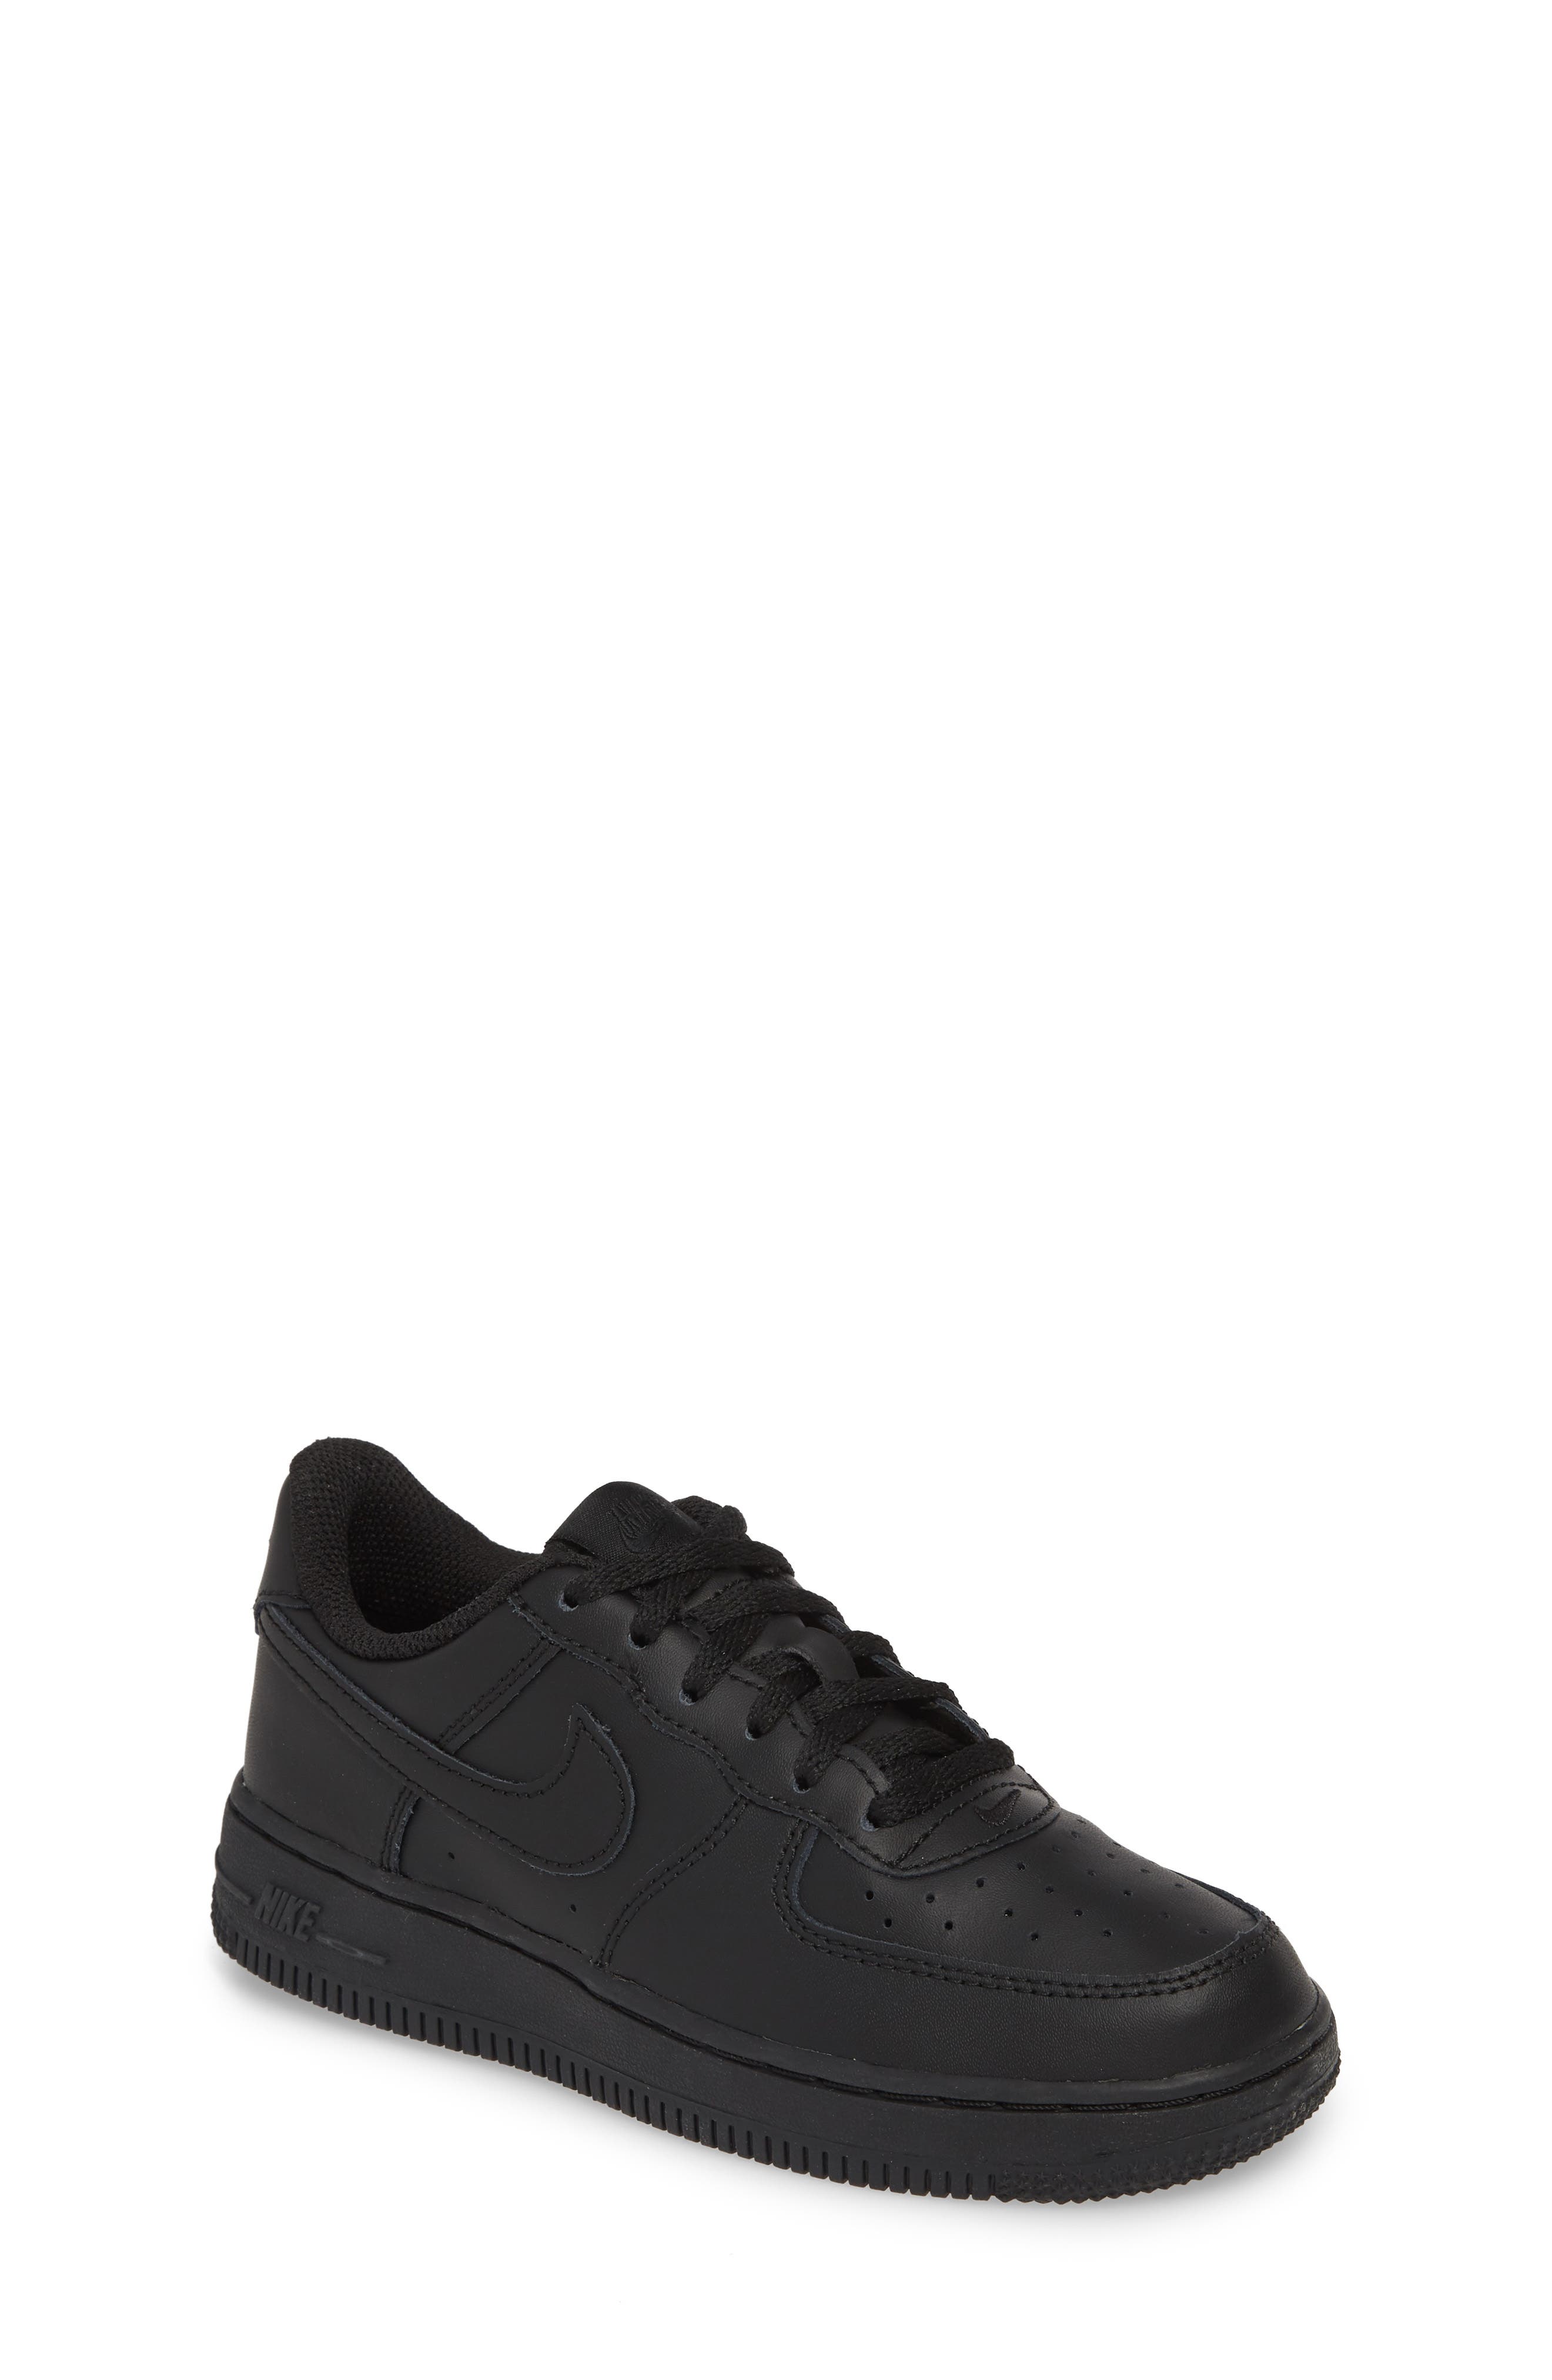 black air force 1 Online Shopping for 